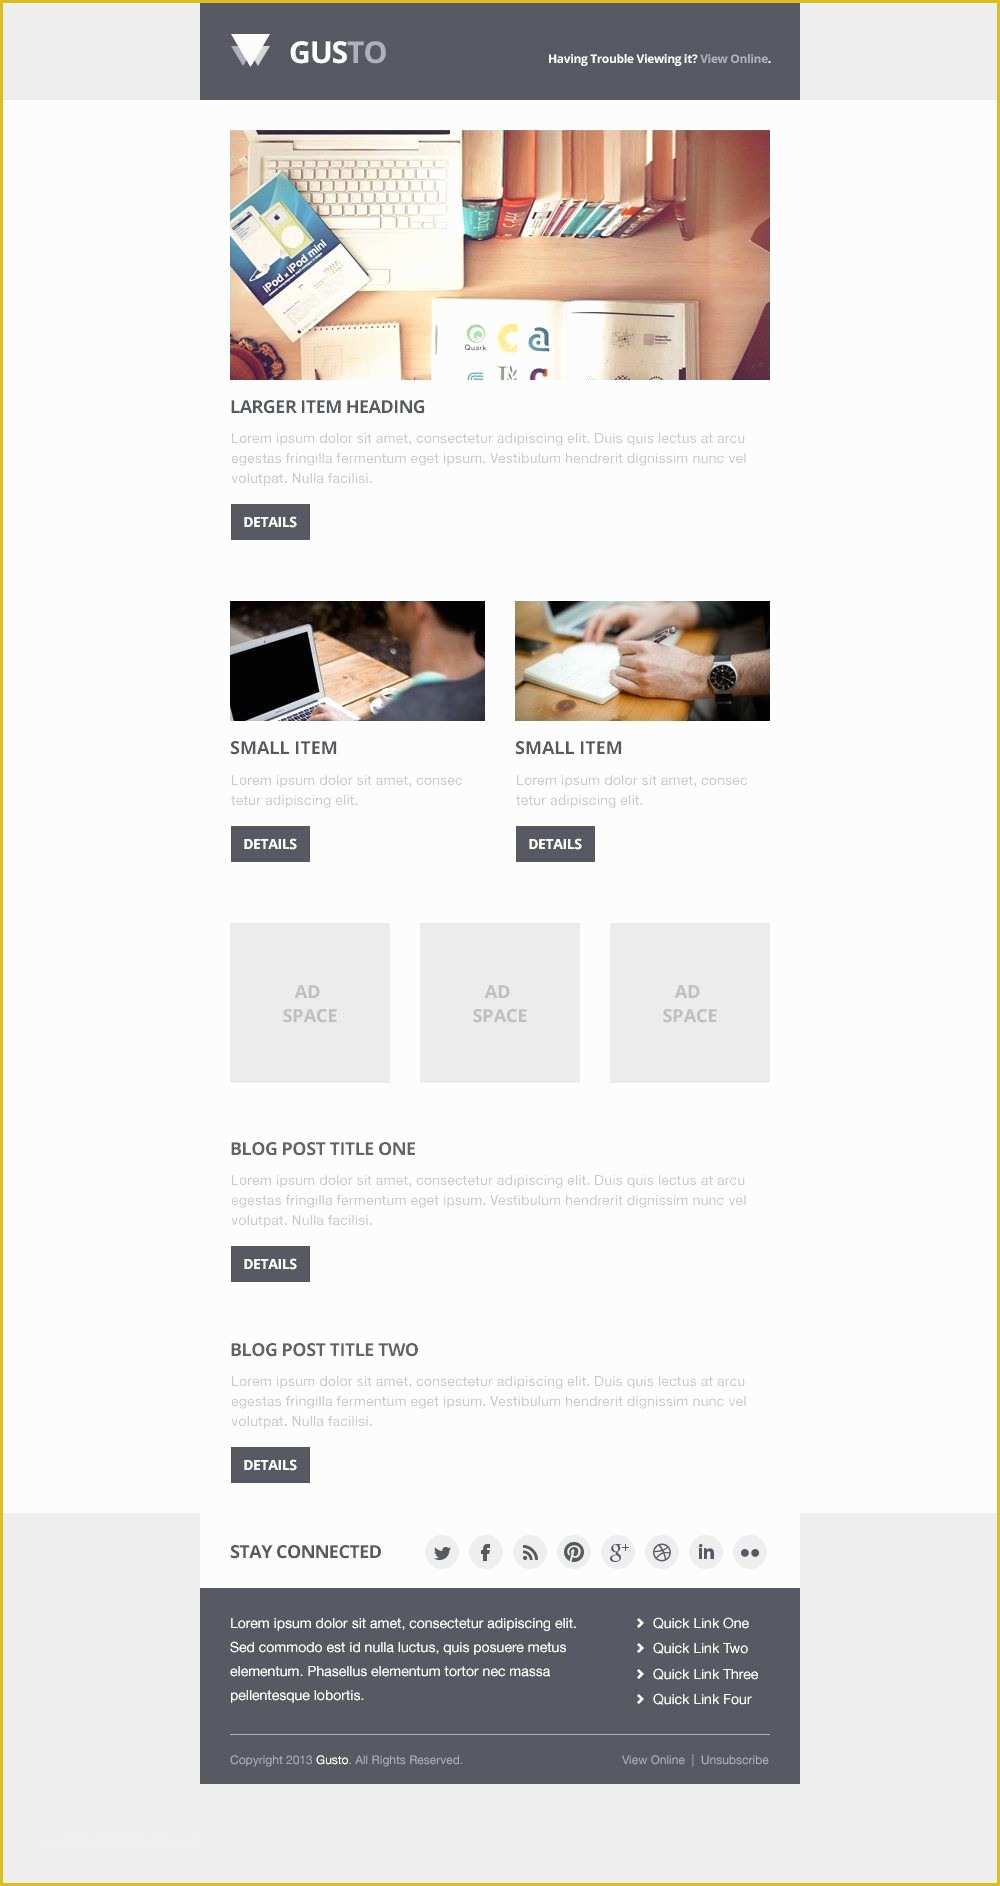 Microsoft Publisher Website Templates Free Download Of Microsoft Publisher Website Templates Free Download